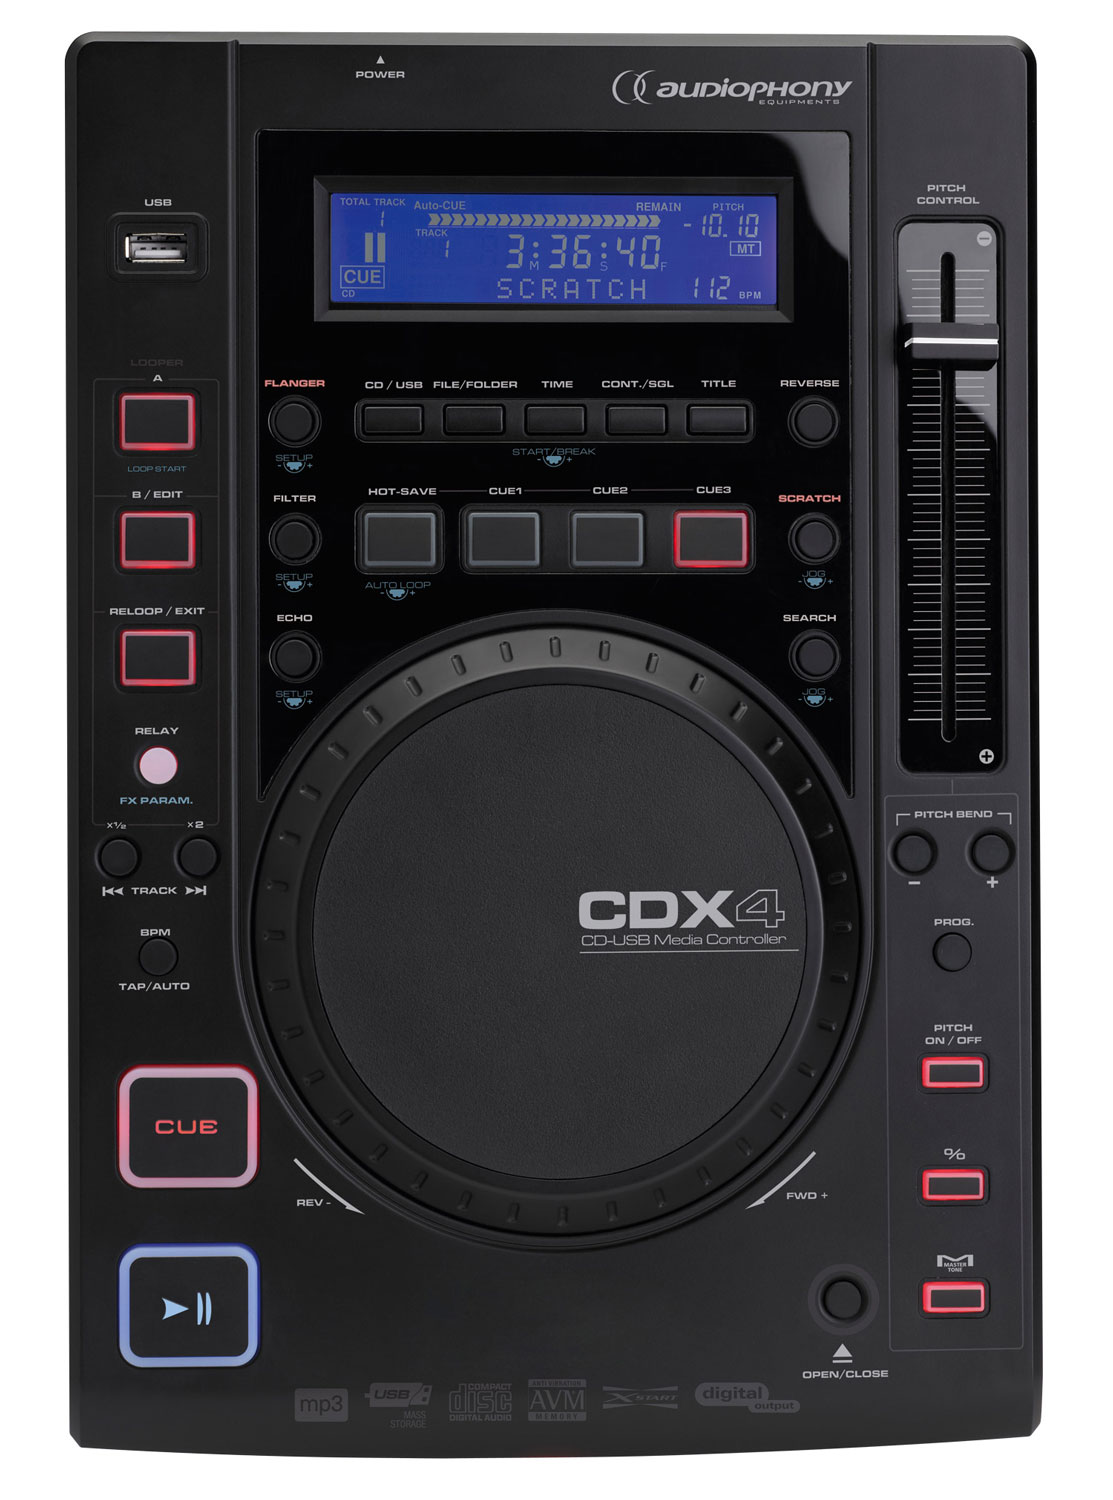 CD / USB / MP3 player with various effects